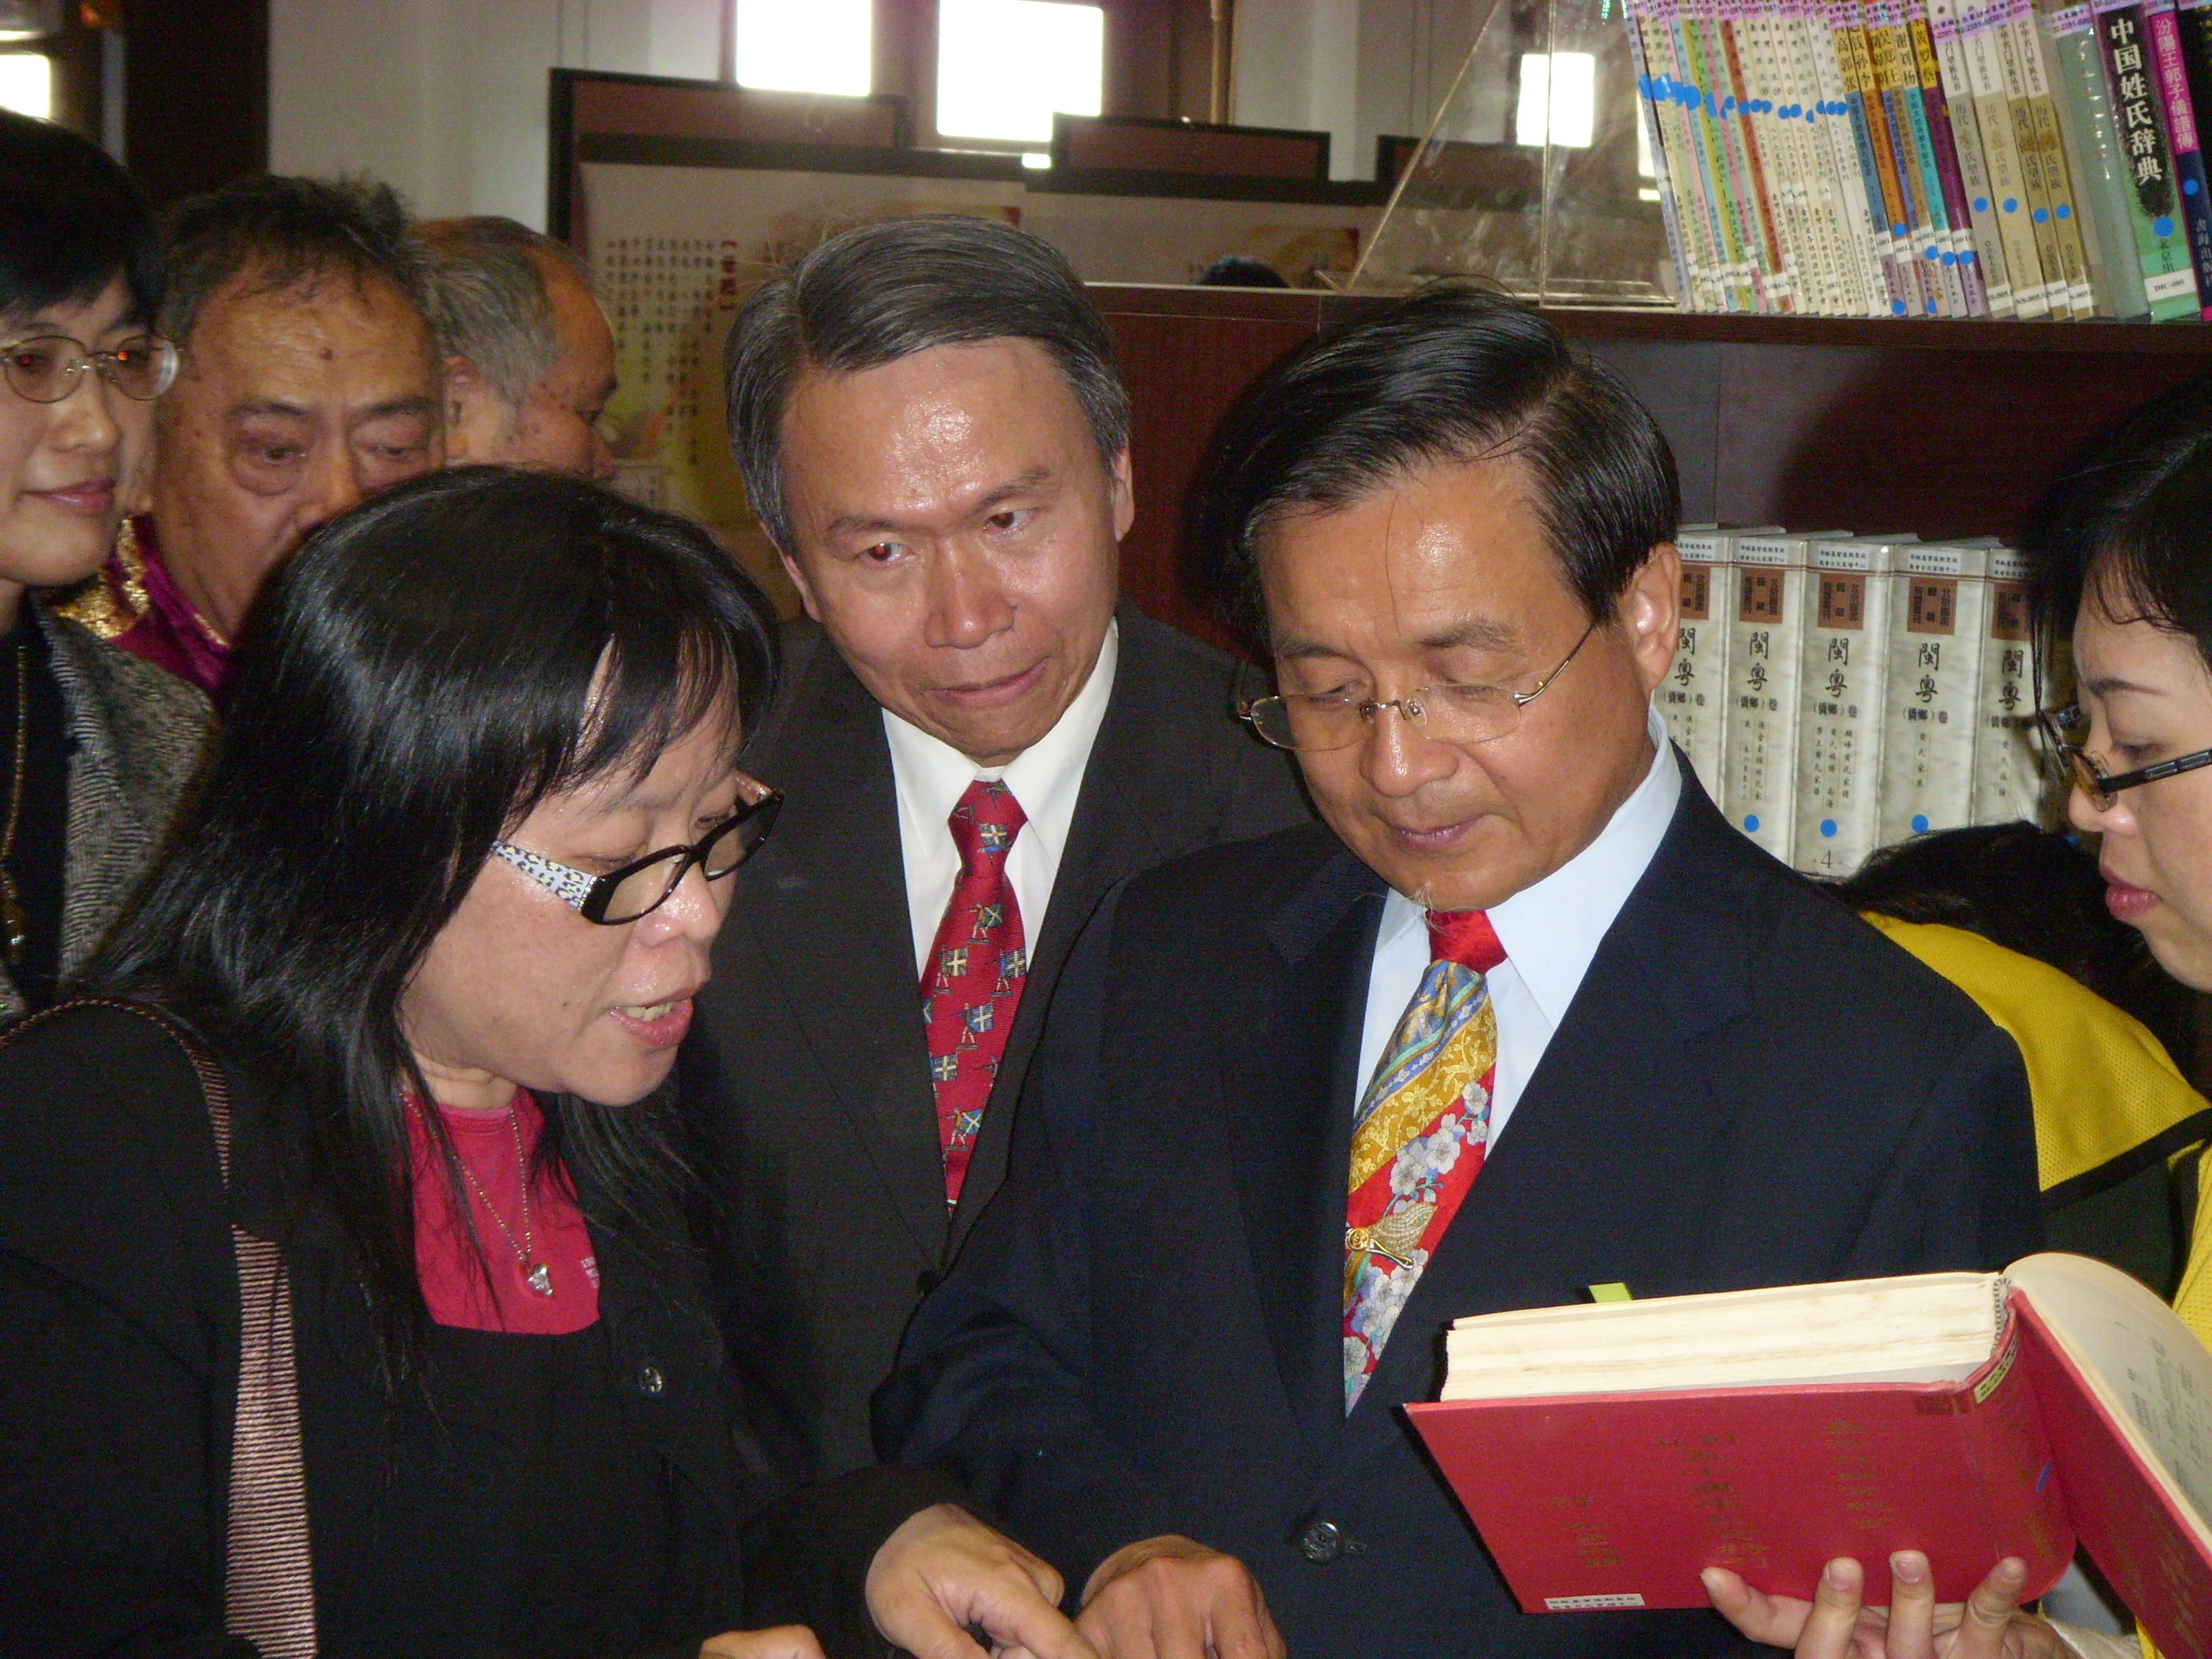 several people looking at a book